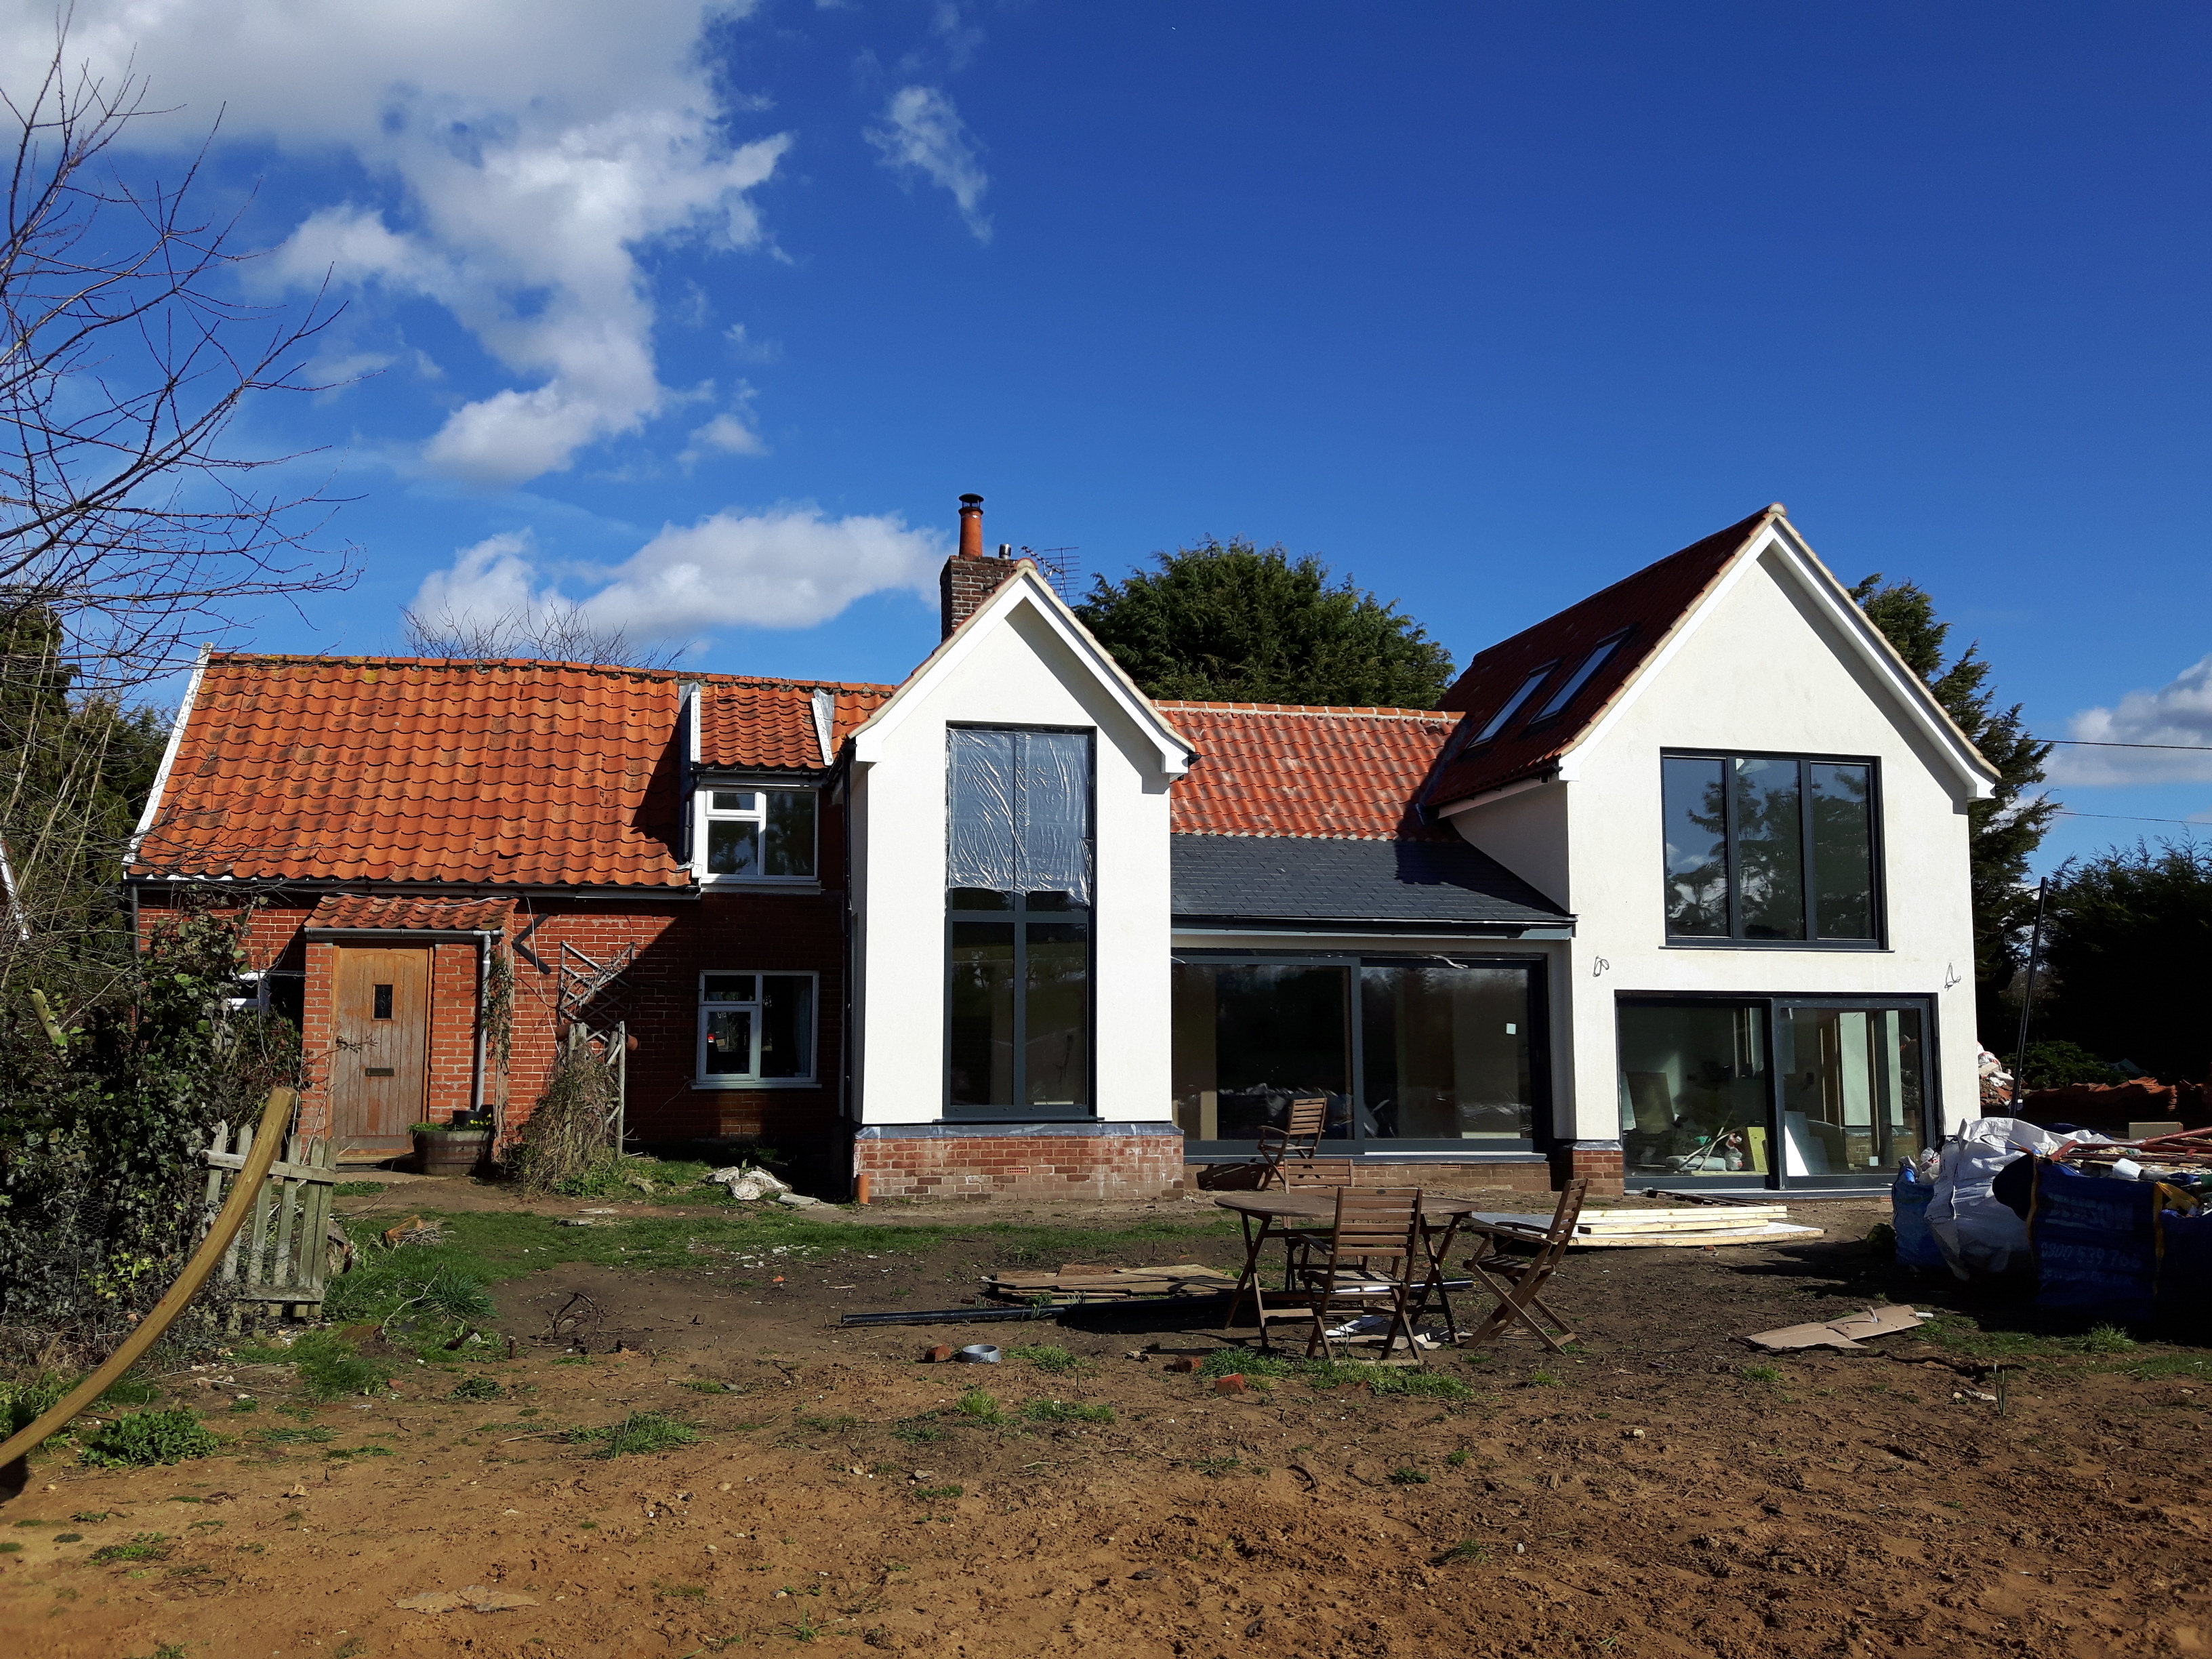 17-004-Rendlesham-Suffolk-AONB-Historic-Cottage-Extension-Alterations-Eco-Almost Finished-Self Build-External-View-001.jpg